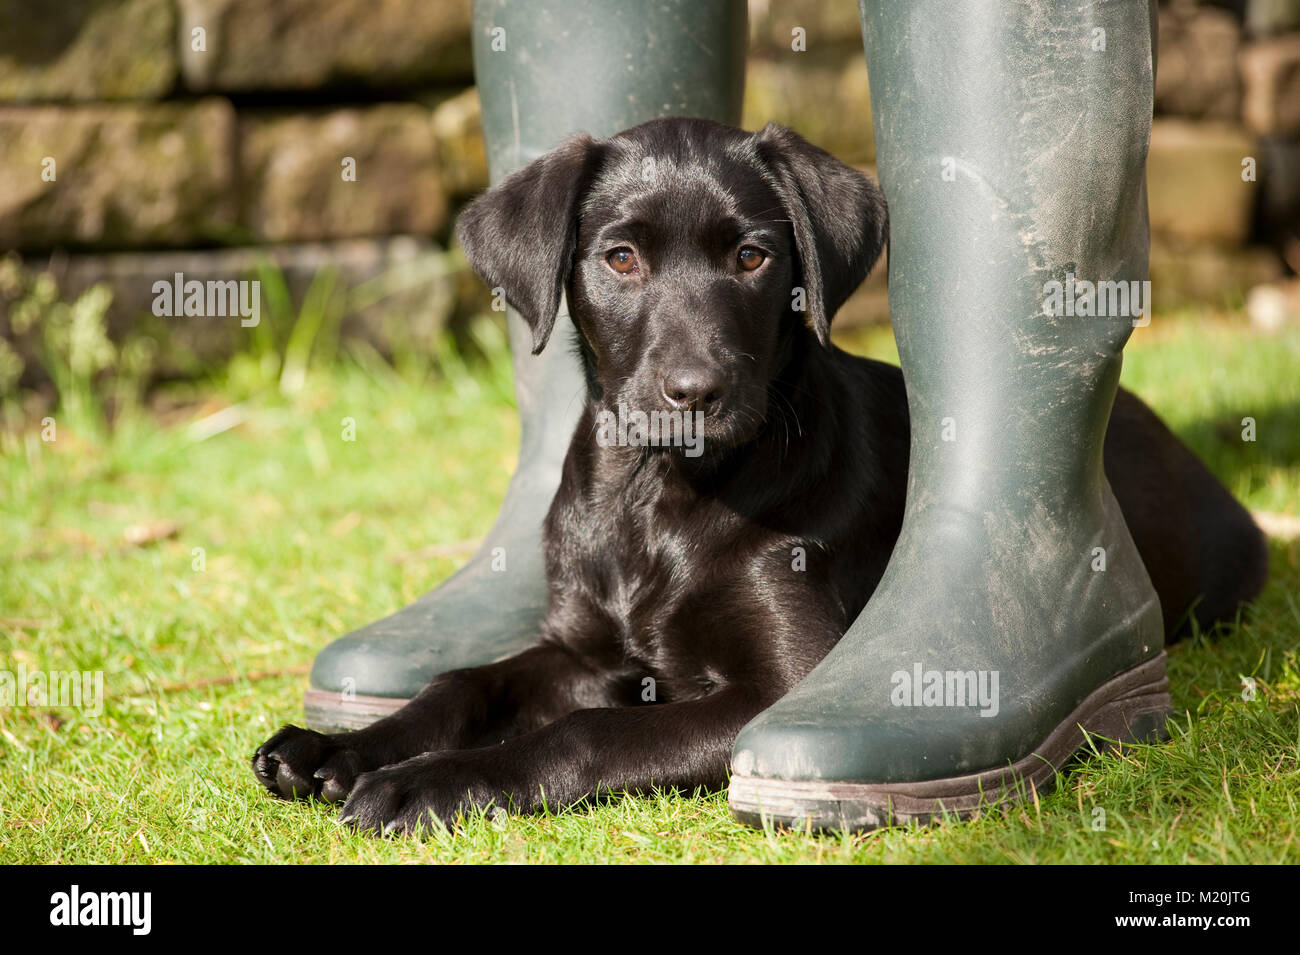 Black Labrador puppy working dog takes rest between owners wellington boots Stock Photo